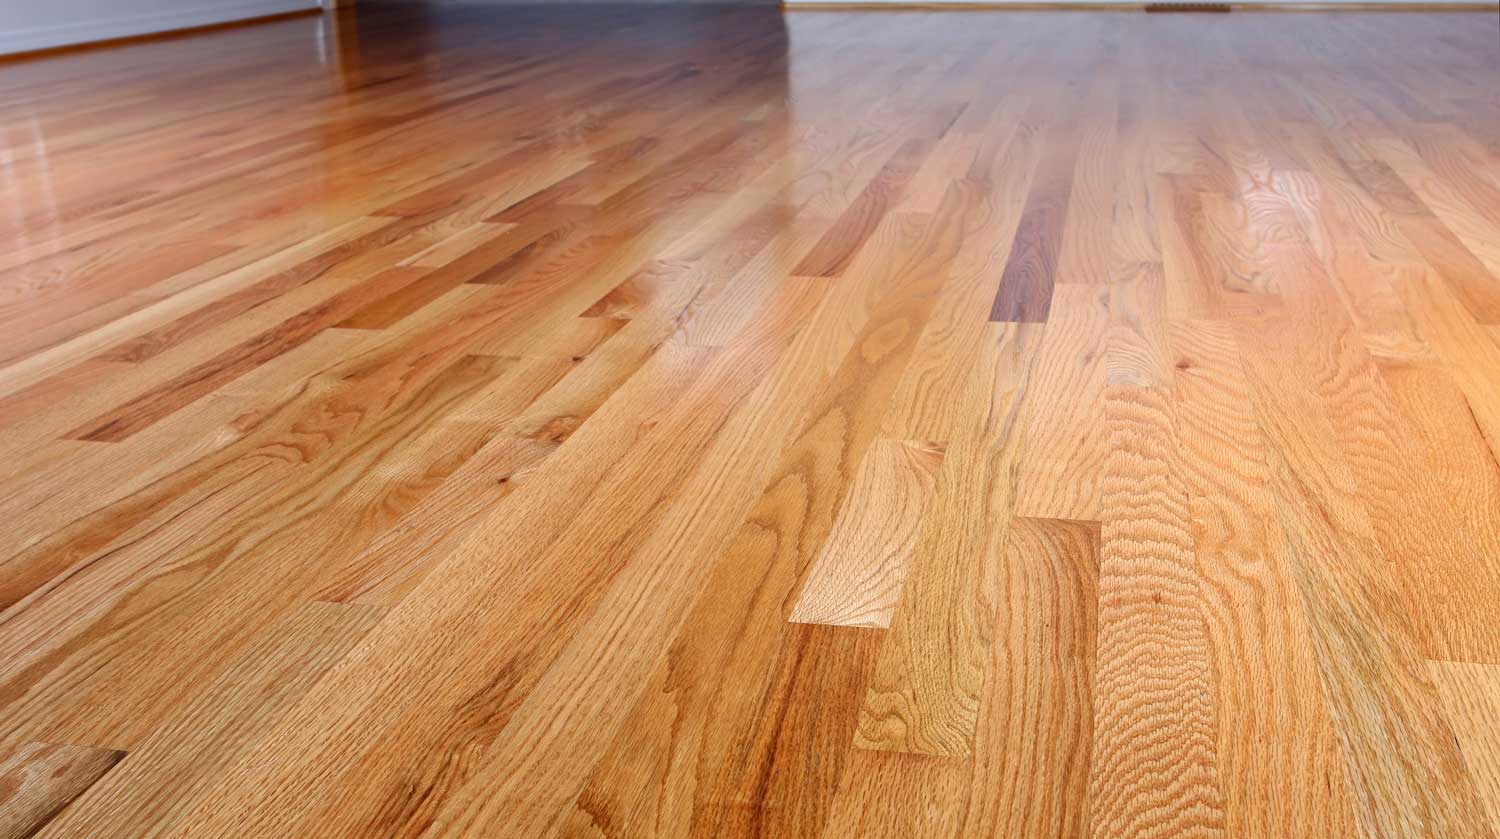 Cost To Refinish A Hardwood Floor, Cost To Sand And Stain Hardwood Floors